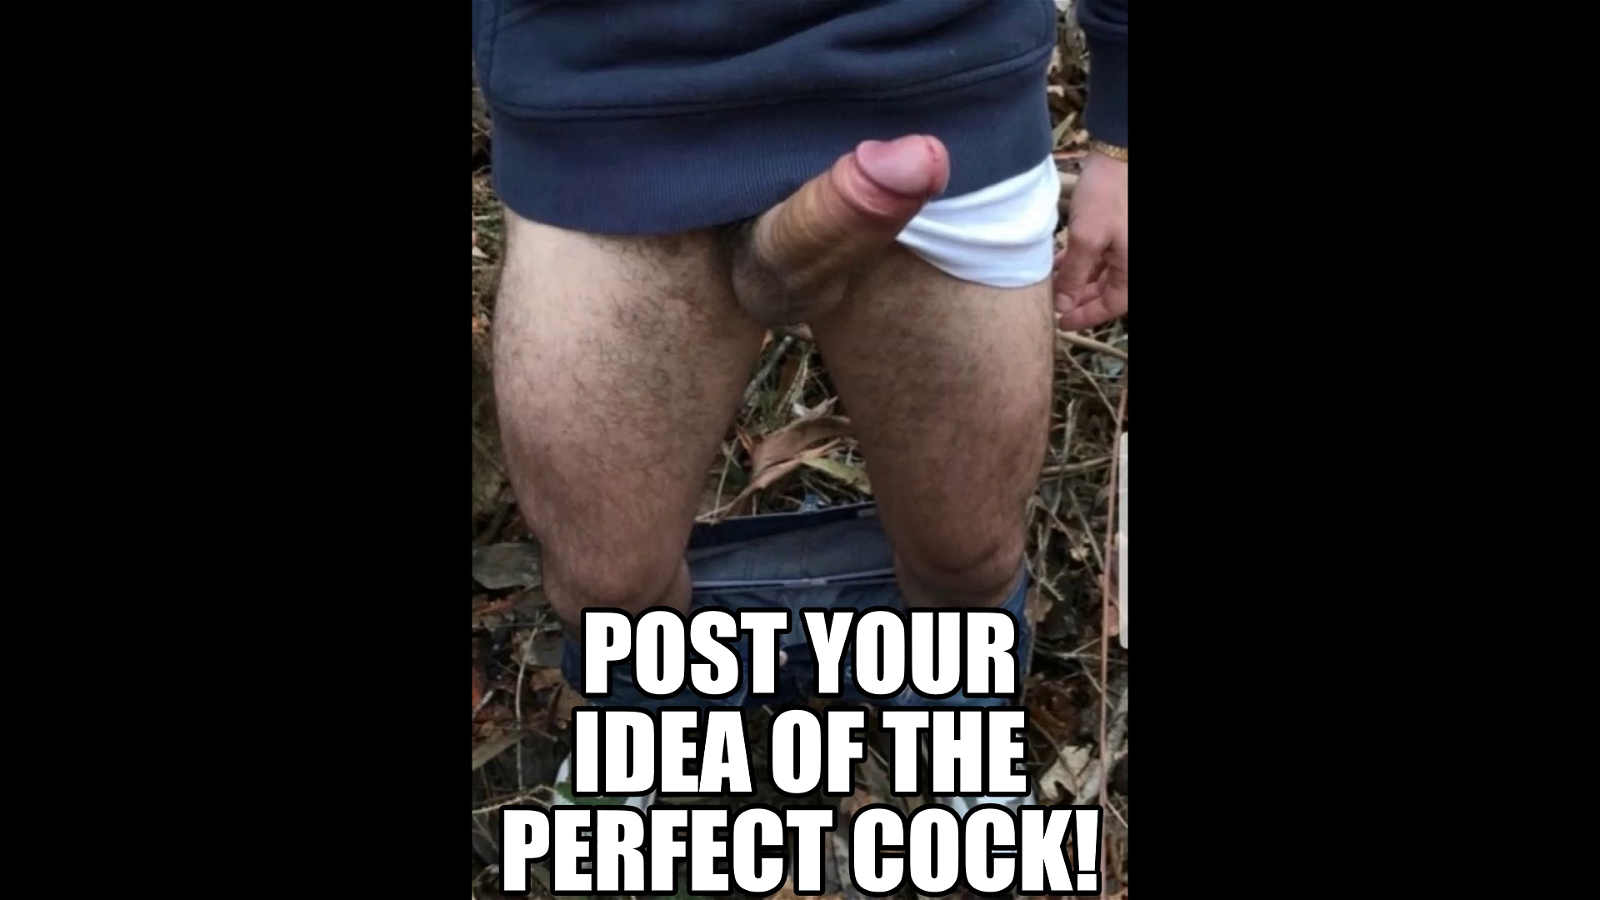 Video by regj with the username @regj, who is a verified user,  November 8, 2019 at 3:40 PM and the text says 'Post your idea of The Perfect Cock!'